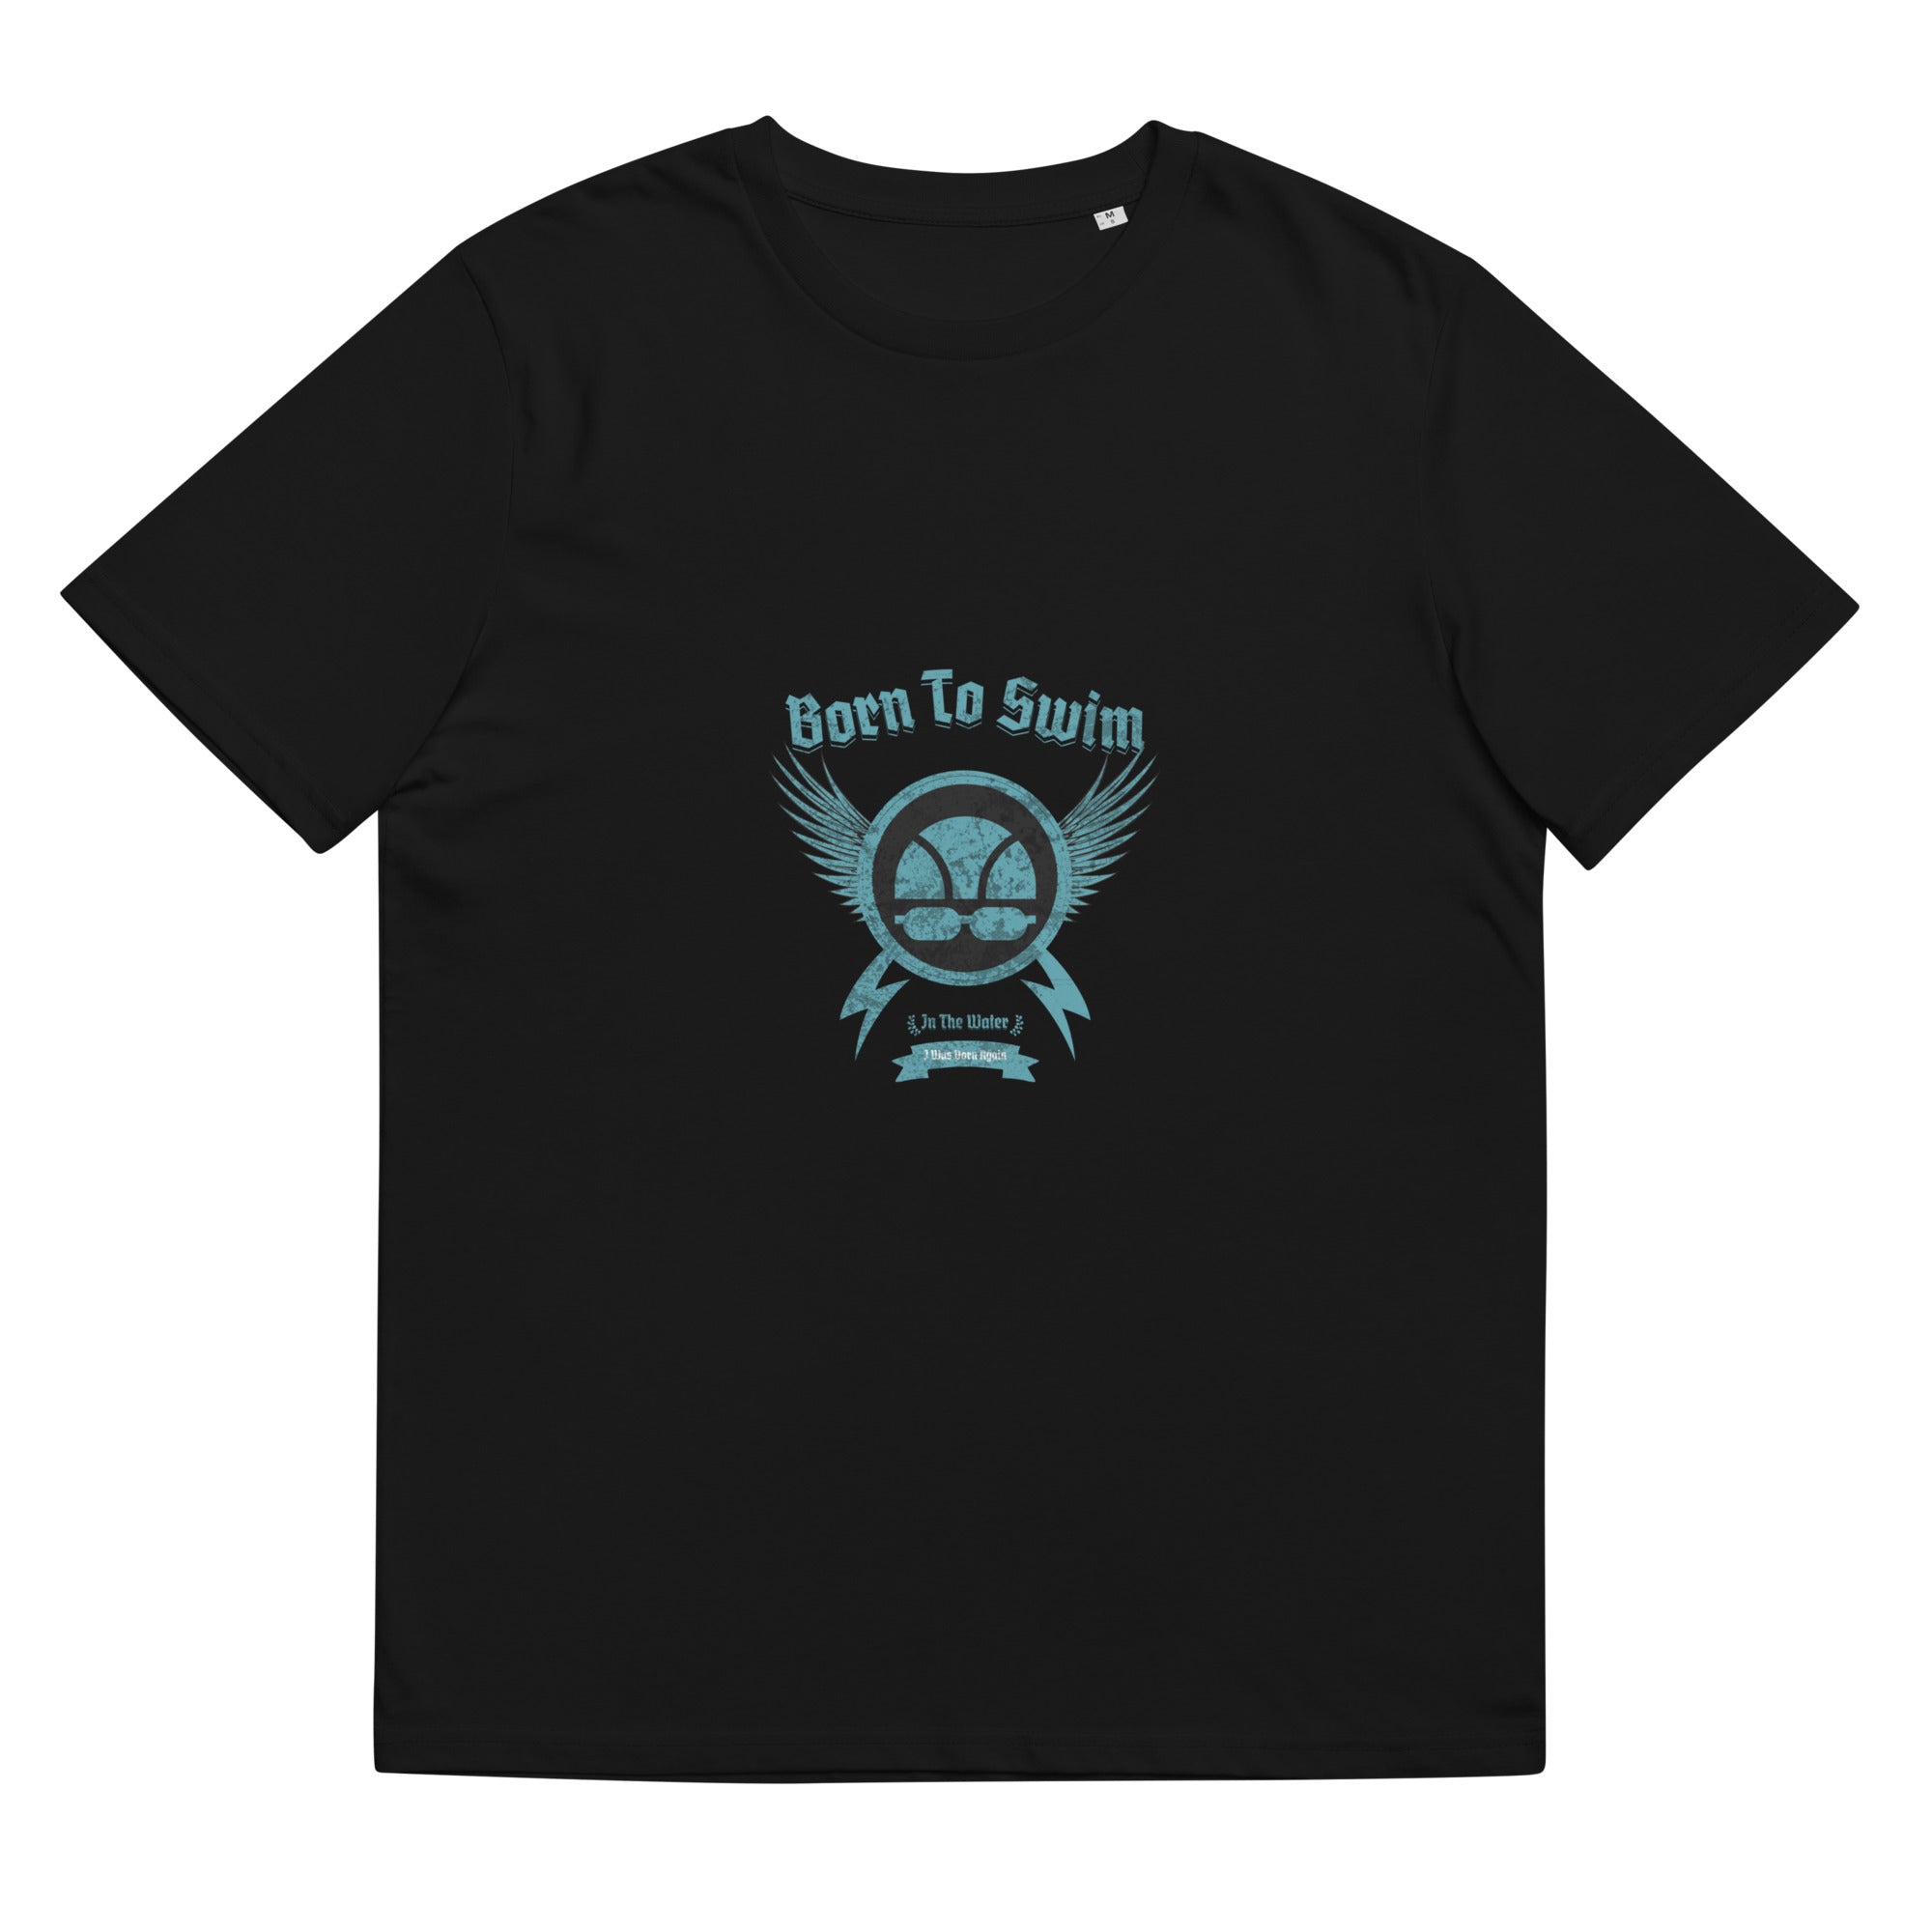 "In The Water I Was Born Again" T-shirt